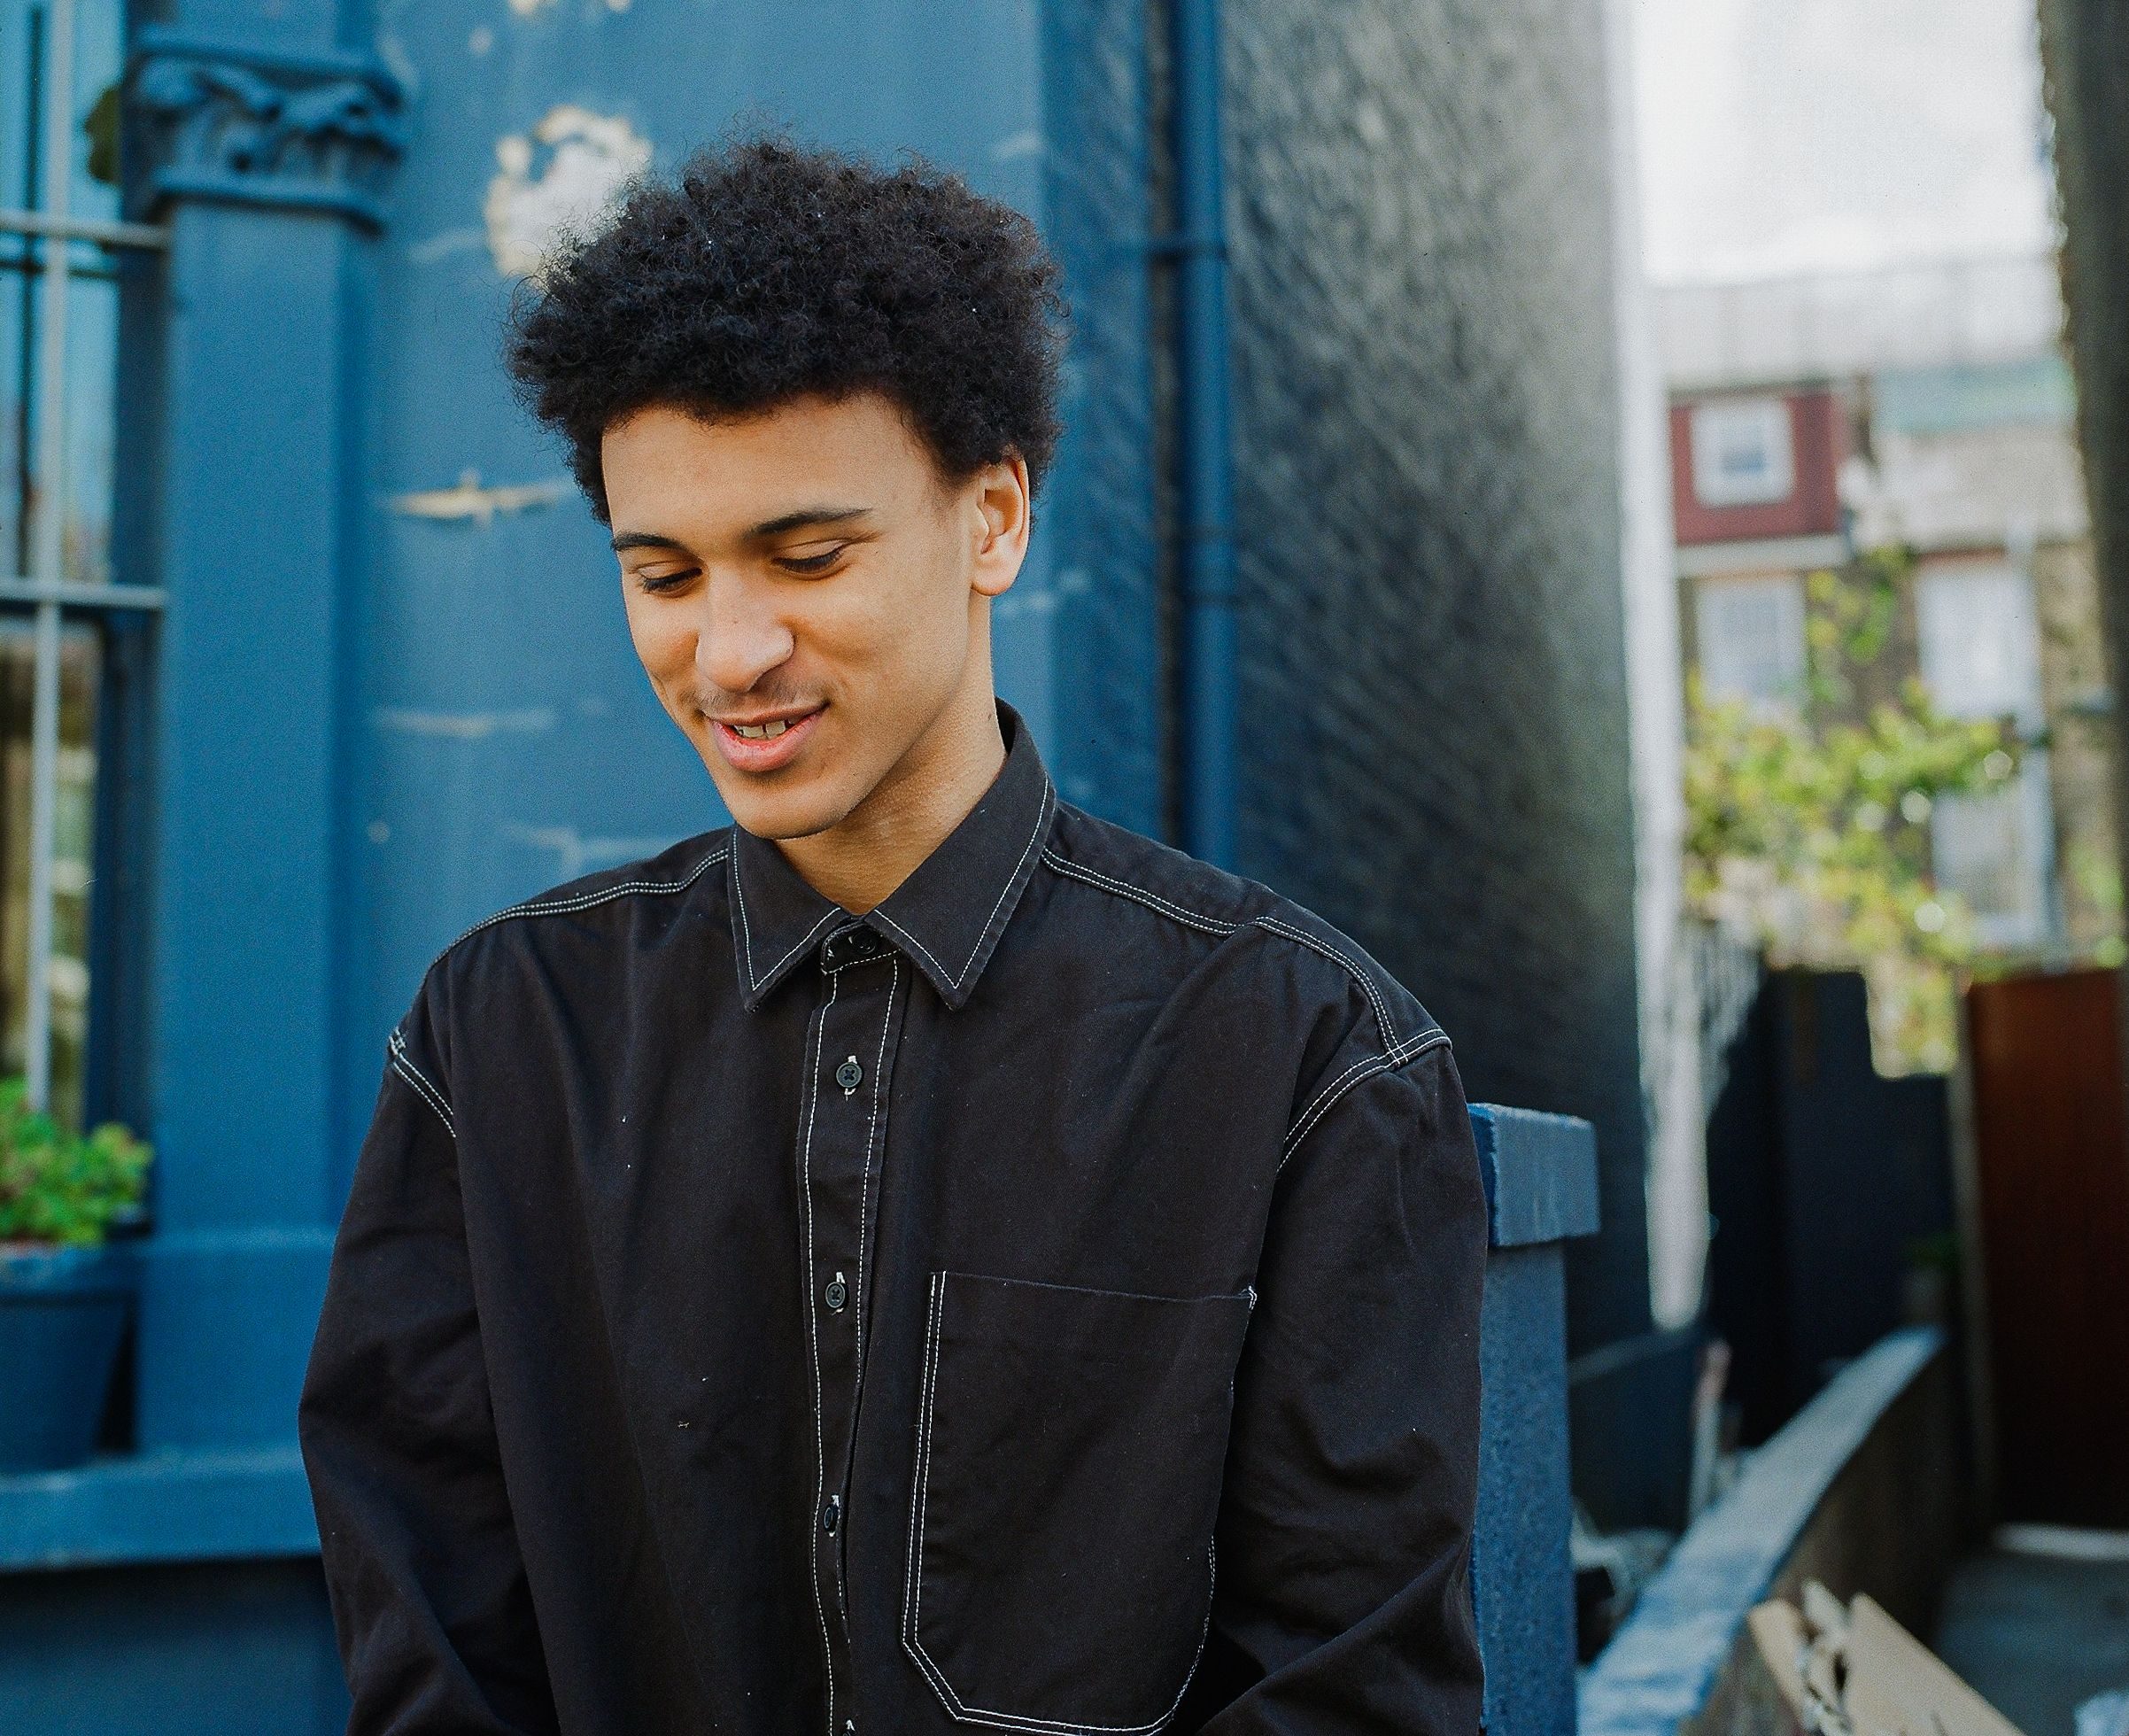 Tayo Sound teams up with Oscar Scheller in new single ‘Two Left Feet’